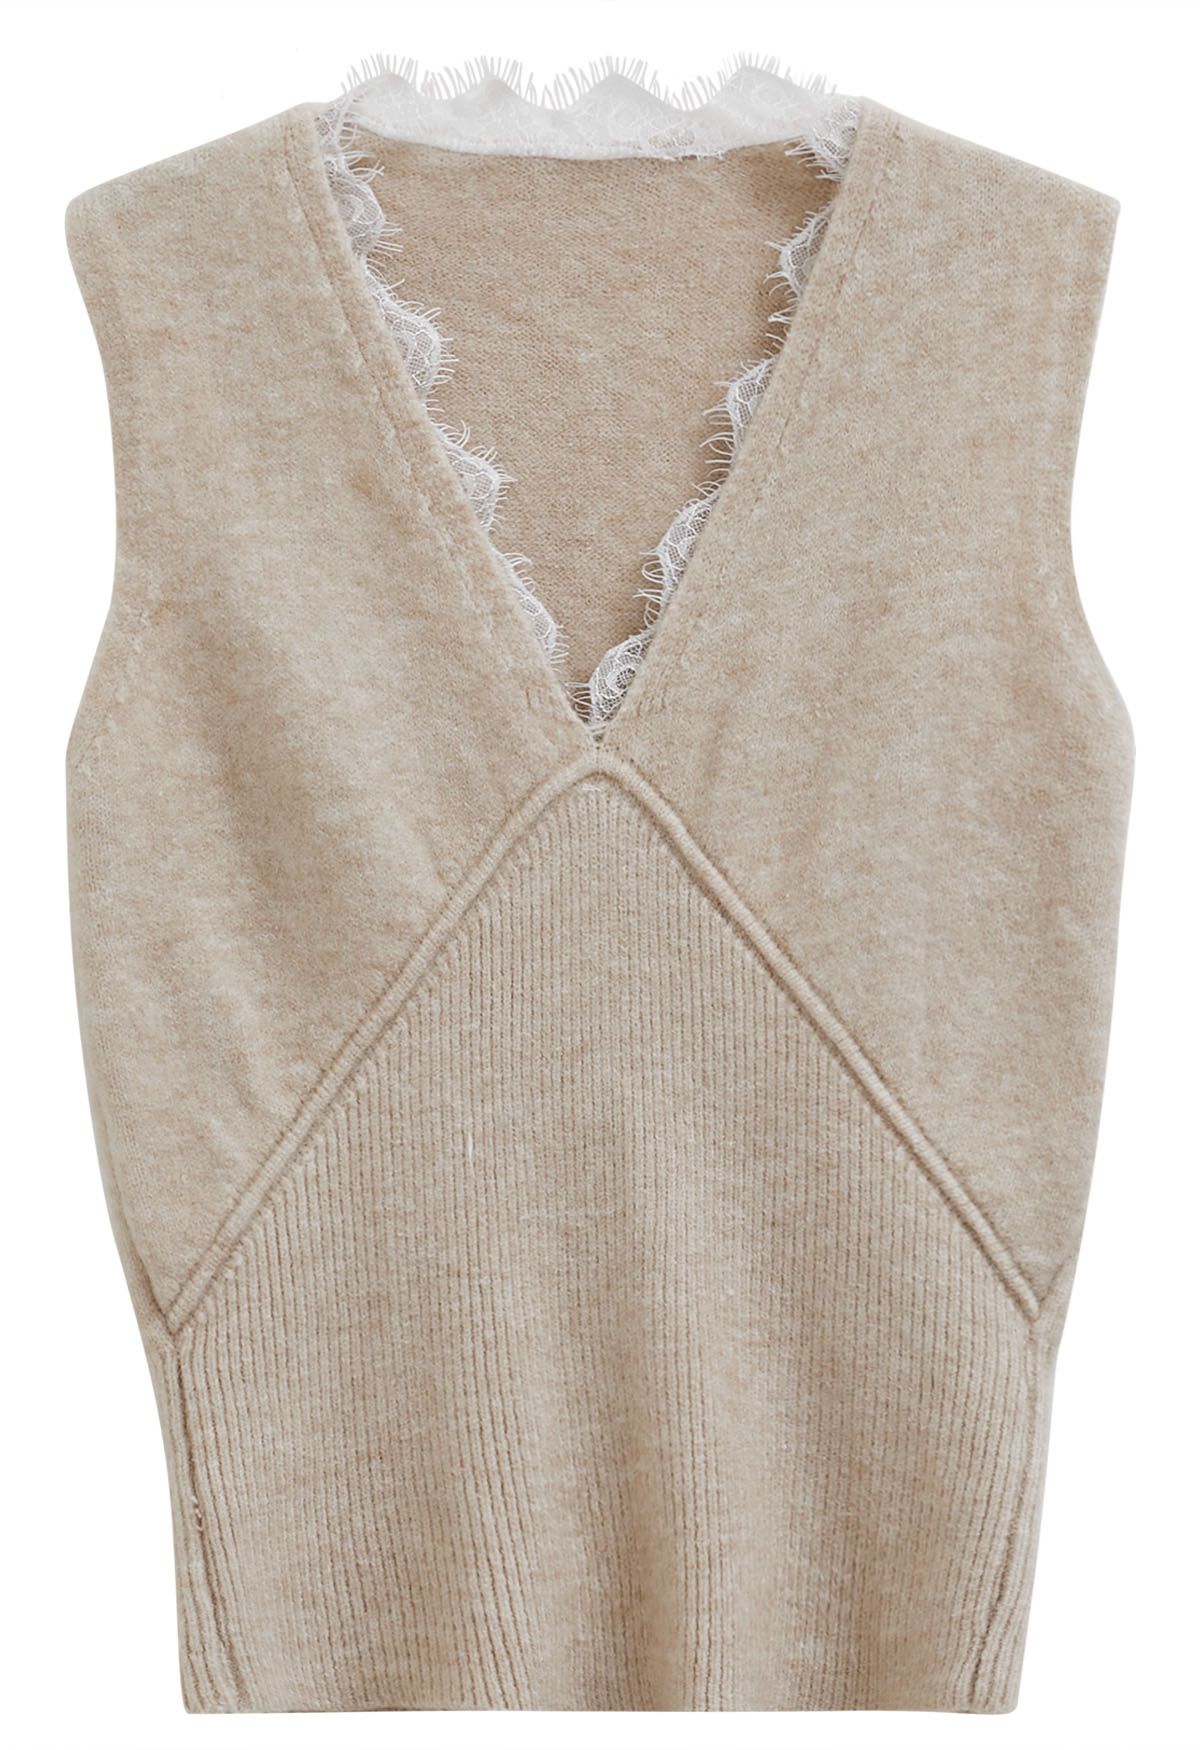 Lacy V-Neck Sleeveless Top and Cardigan Set in Oatmeal